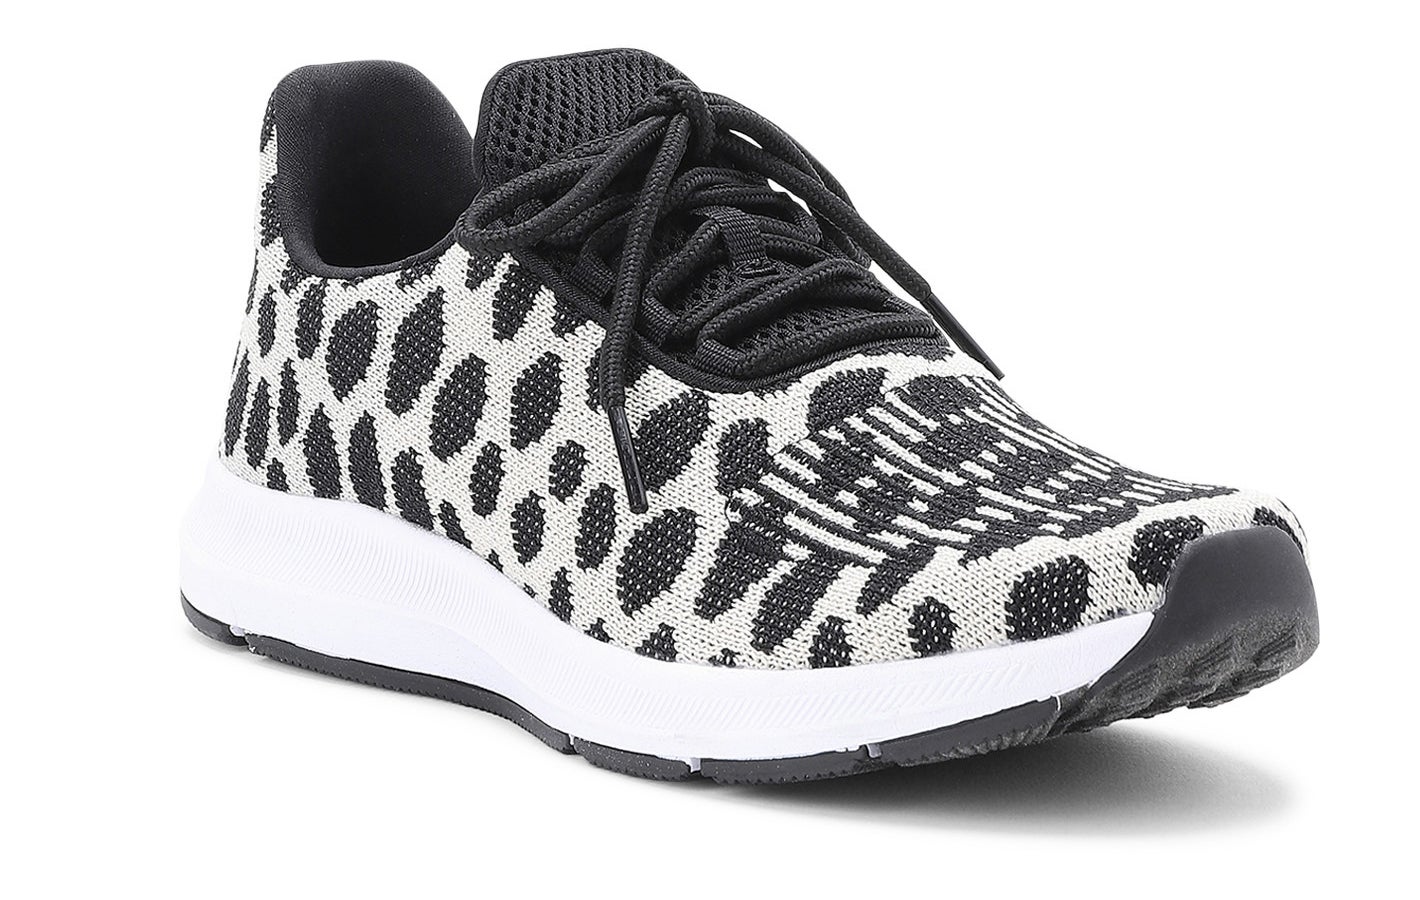 A pair of leopard print sneakers